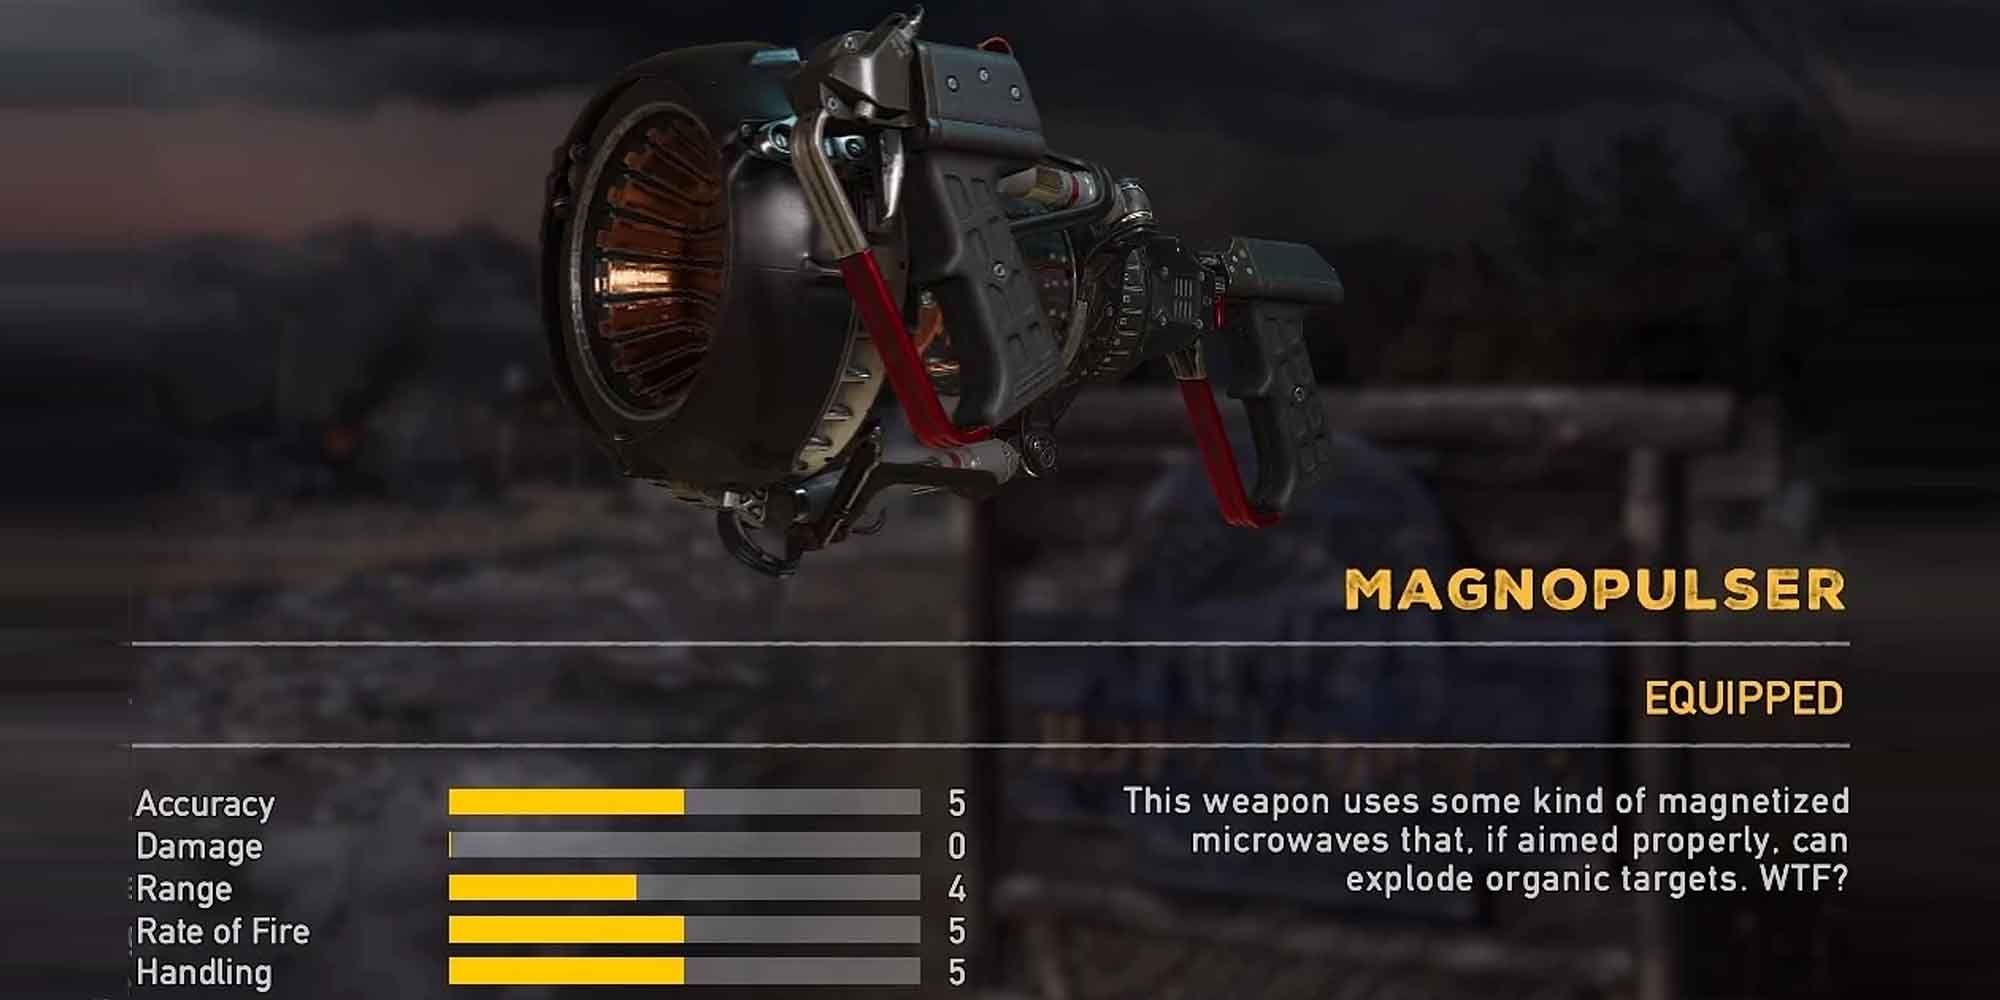 The Magnopulser is an energy-based weapon in Far Cry 5